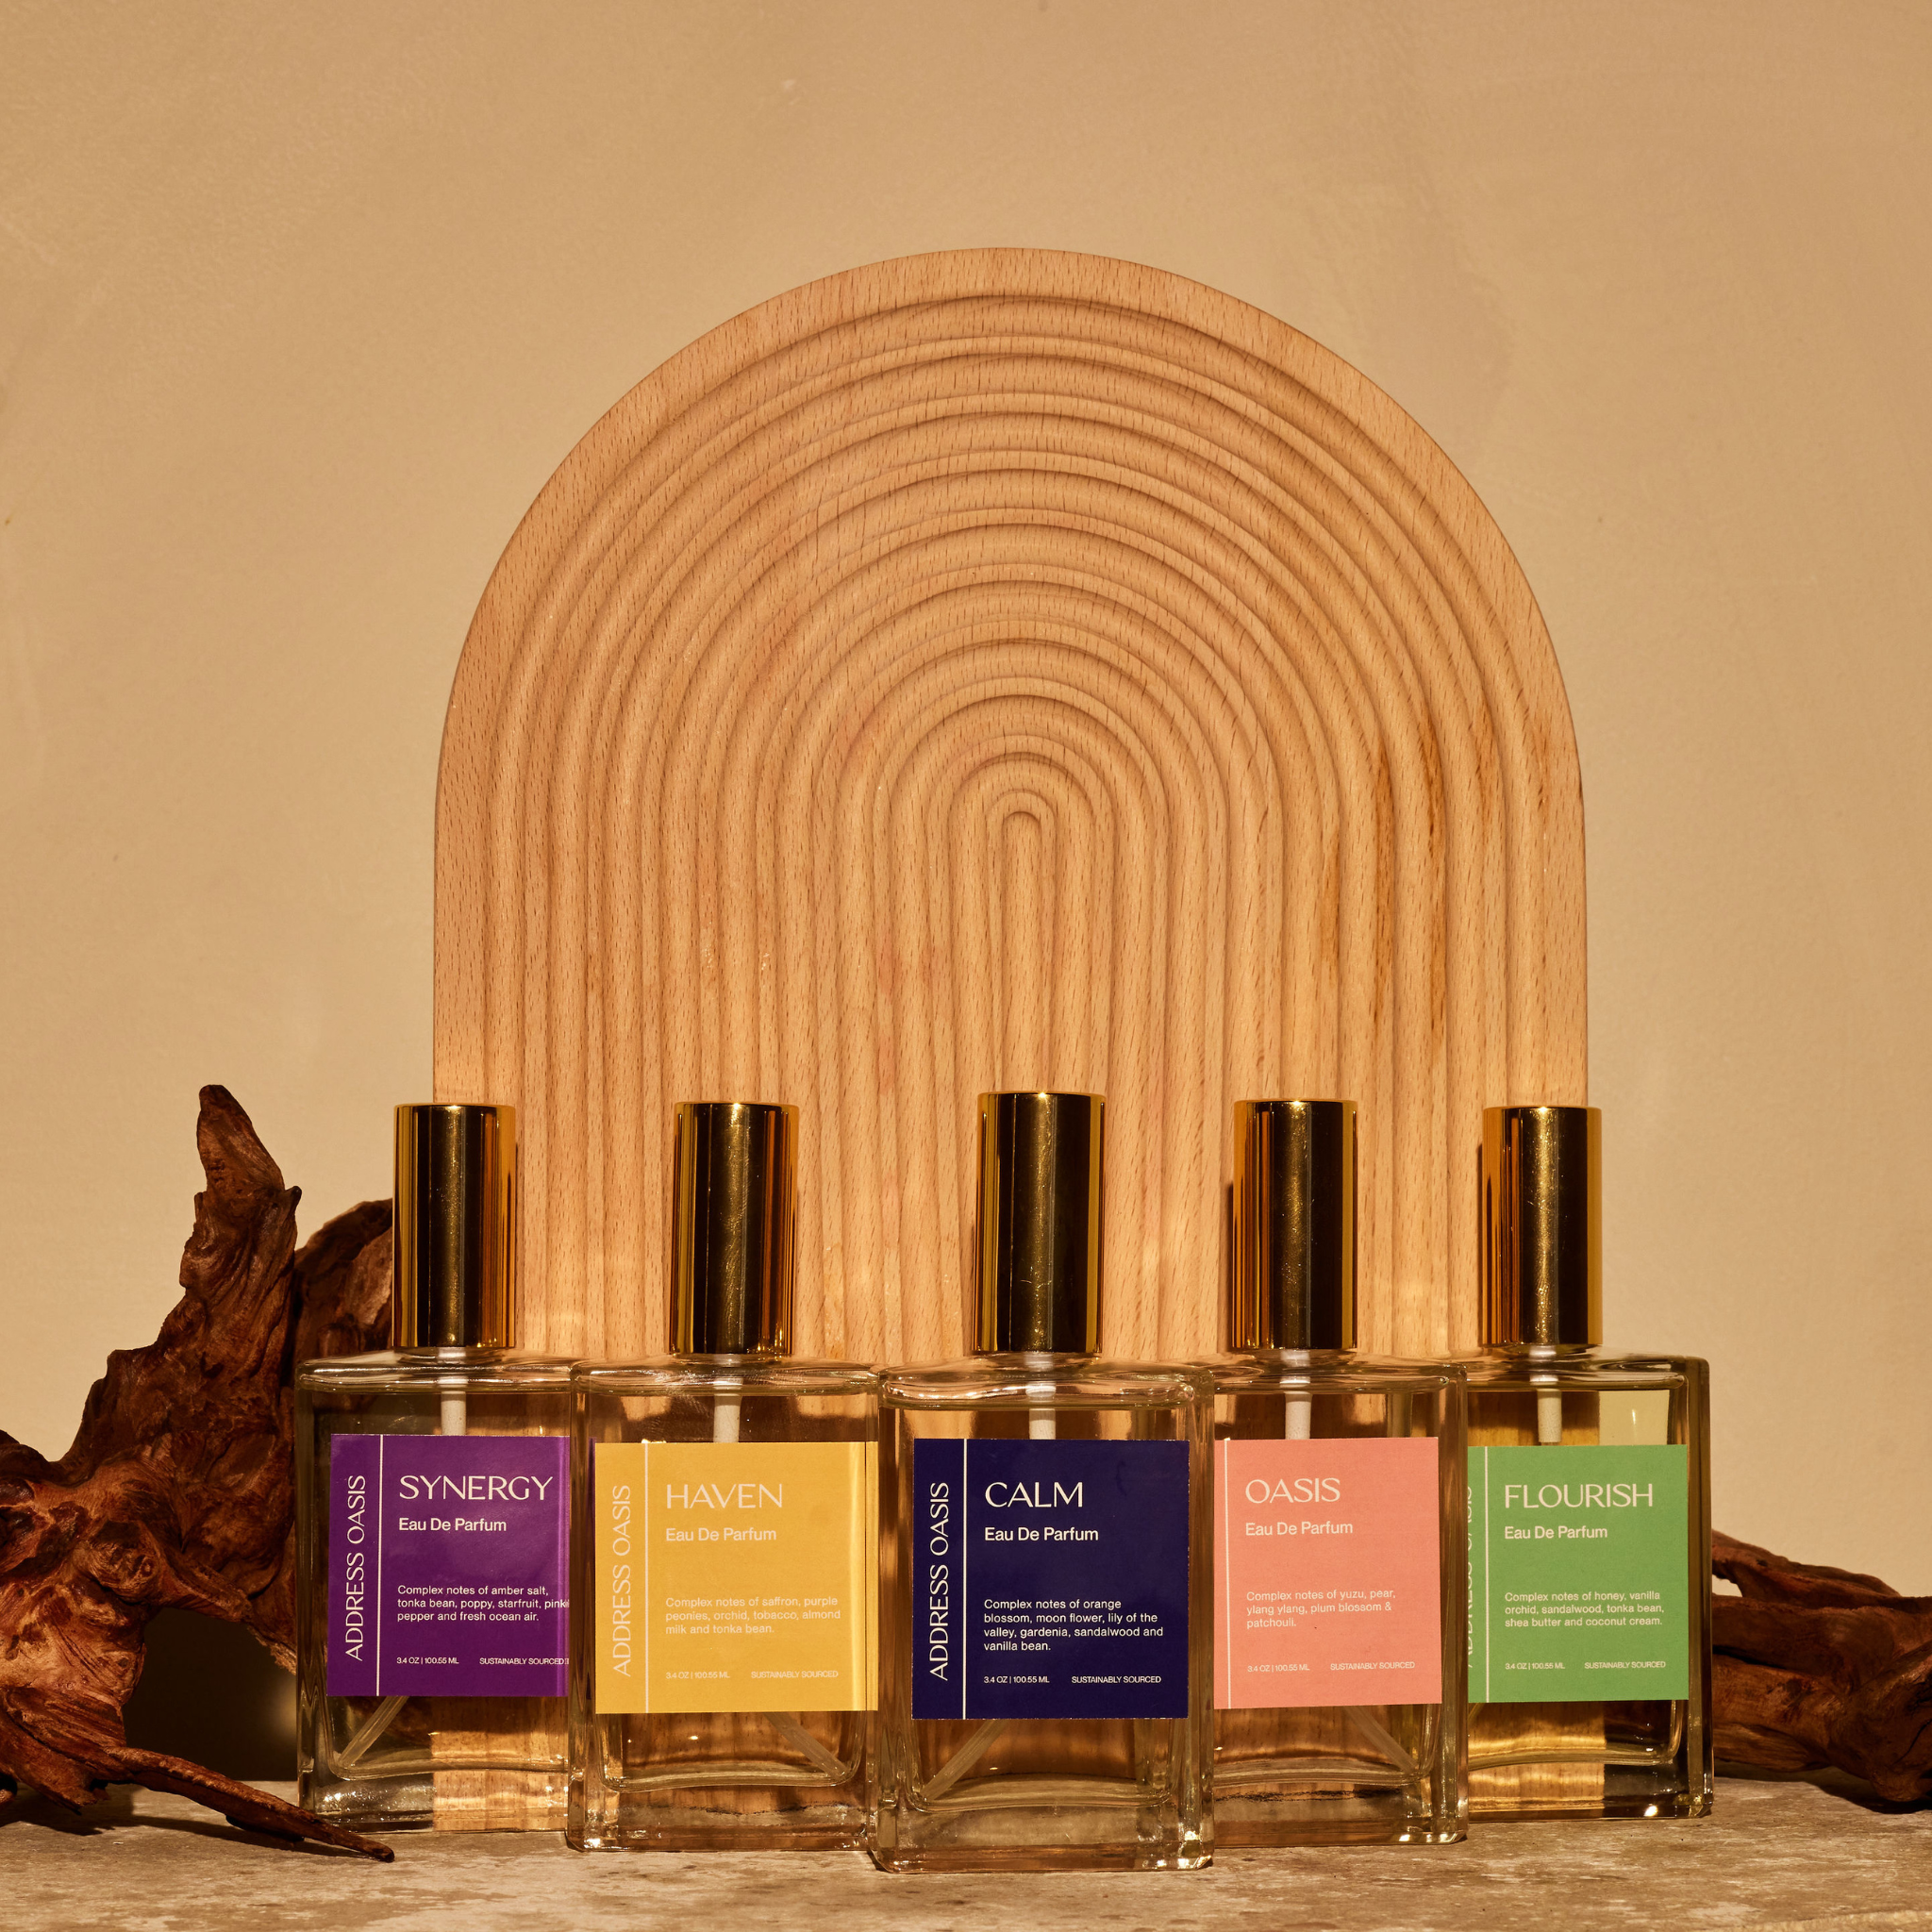 The Complete Fragrance Experience